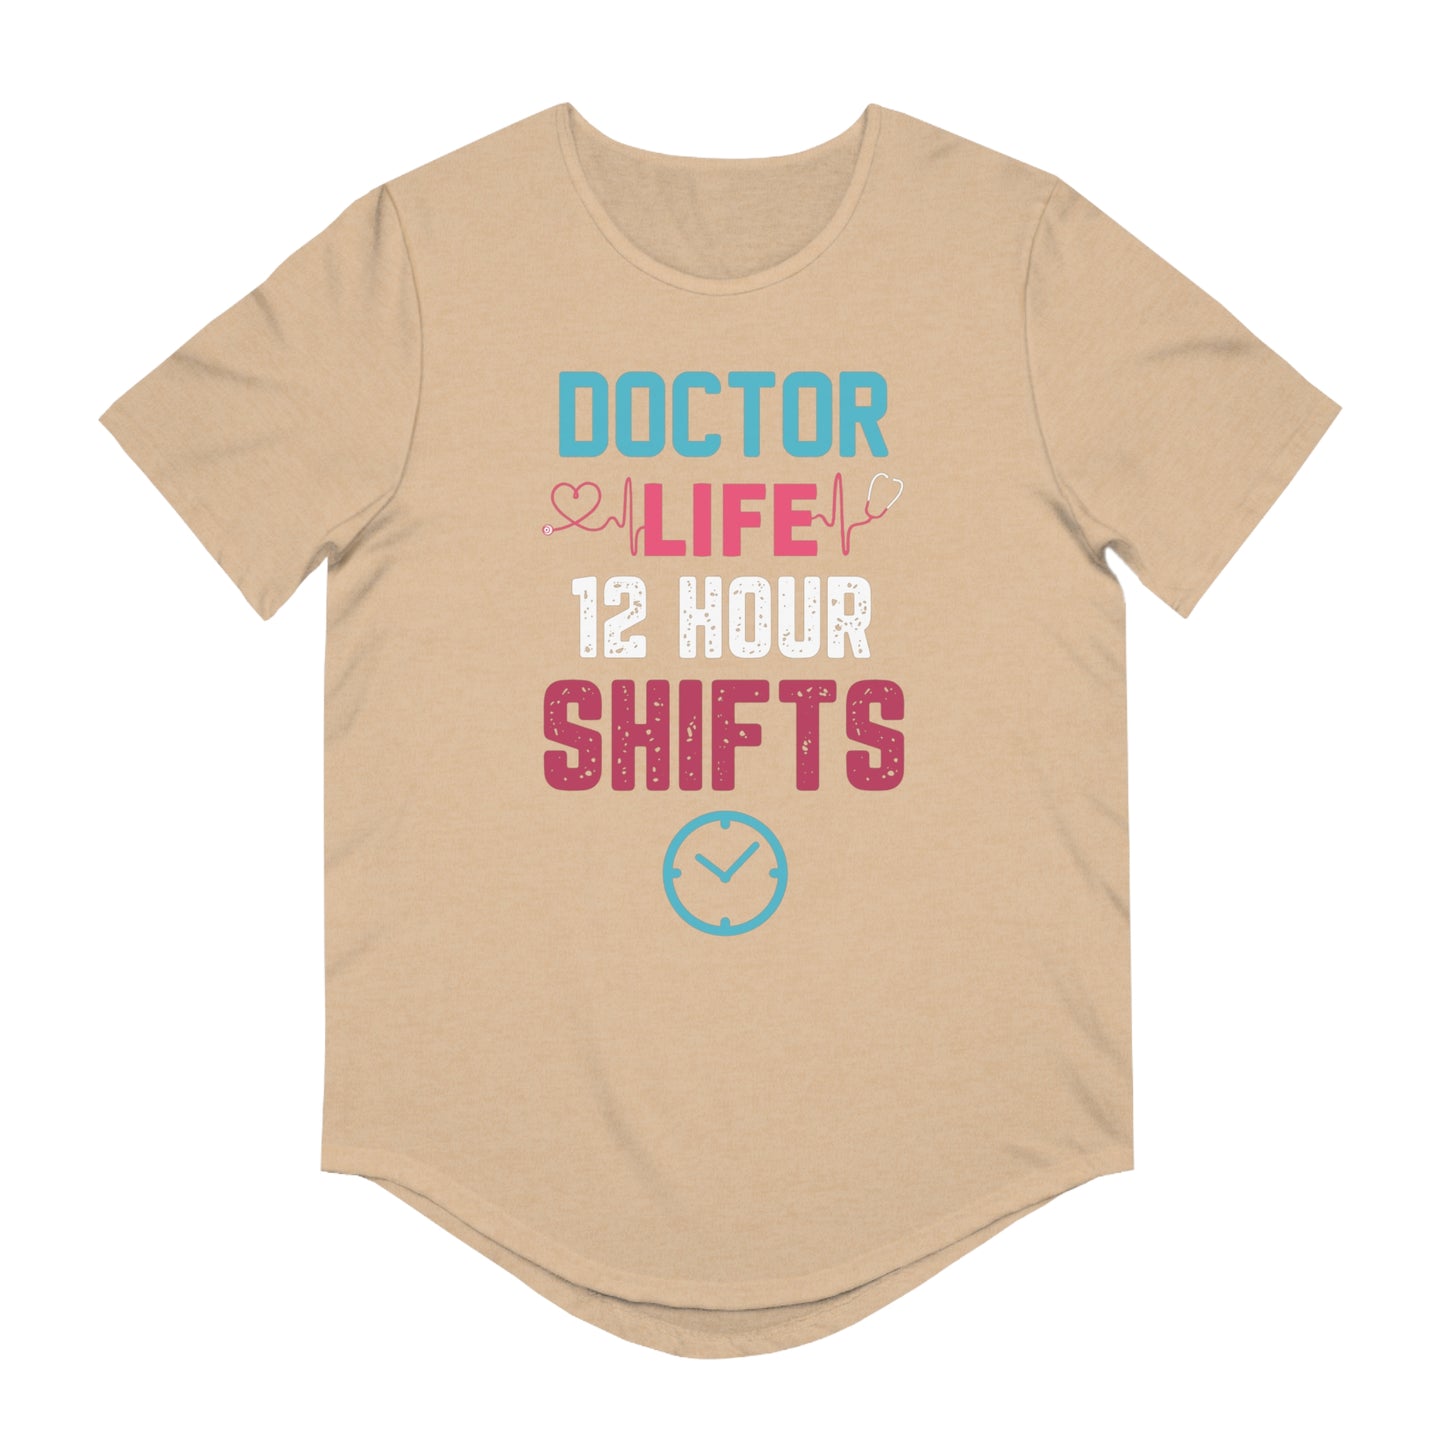 Doctor Life 12 Hour Shifts Men's Jersey Curved Hem Tee, Doctor shirts, Doctor gift ideas, New Doctor shirt, doctors gift, Doctor team shirt